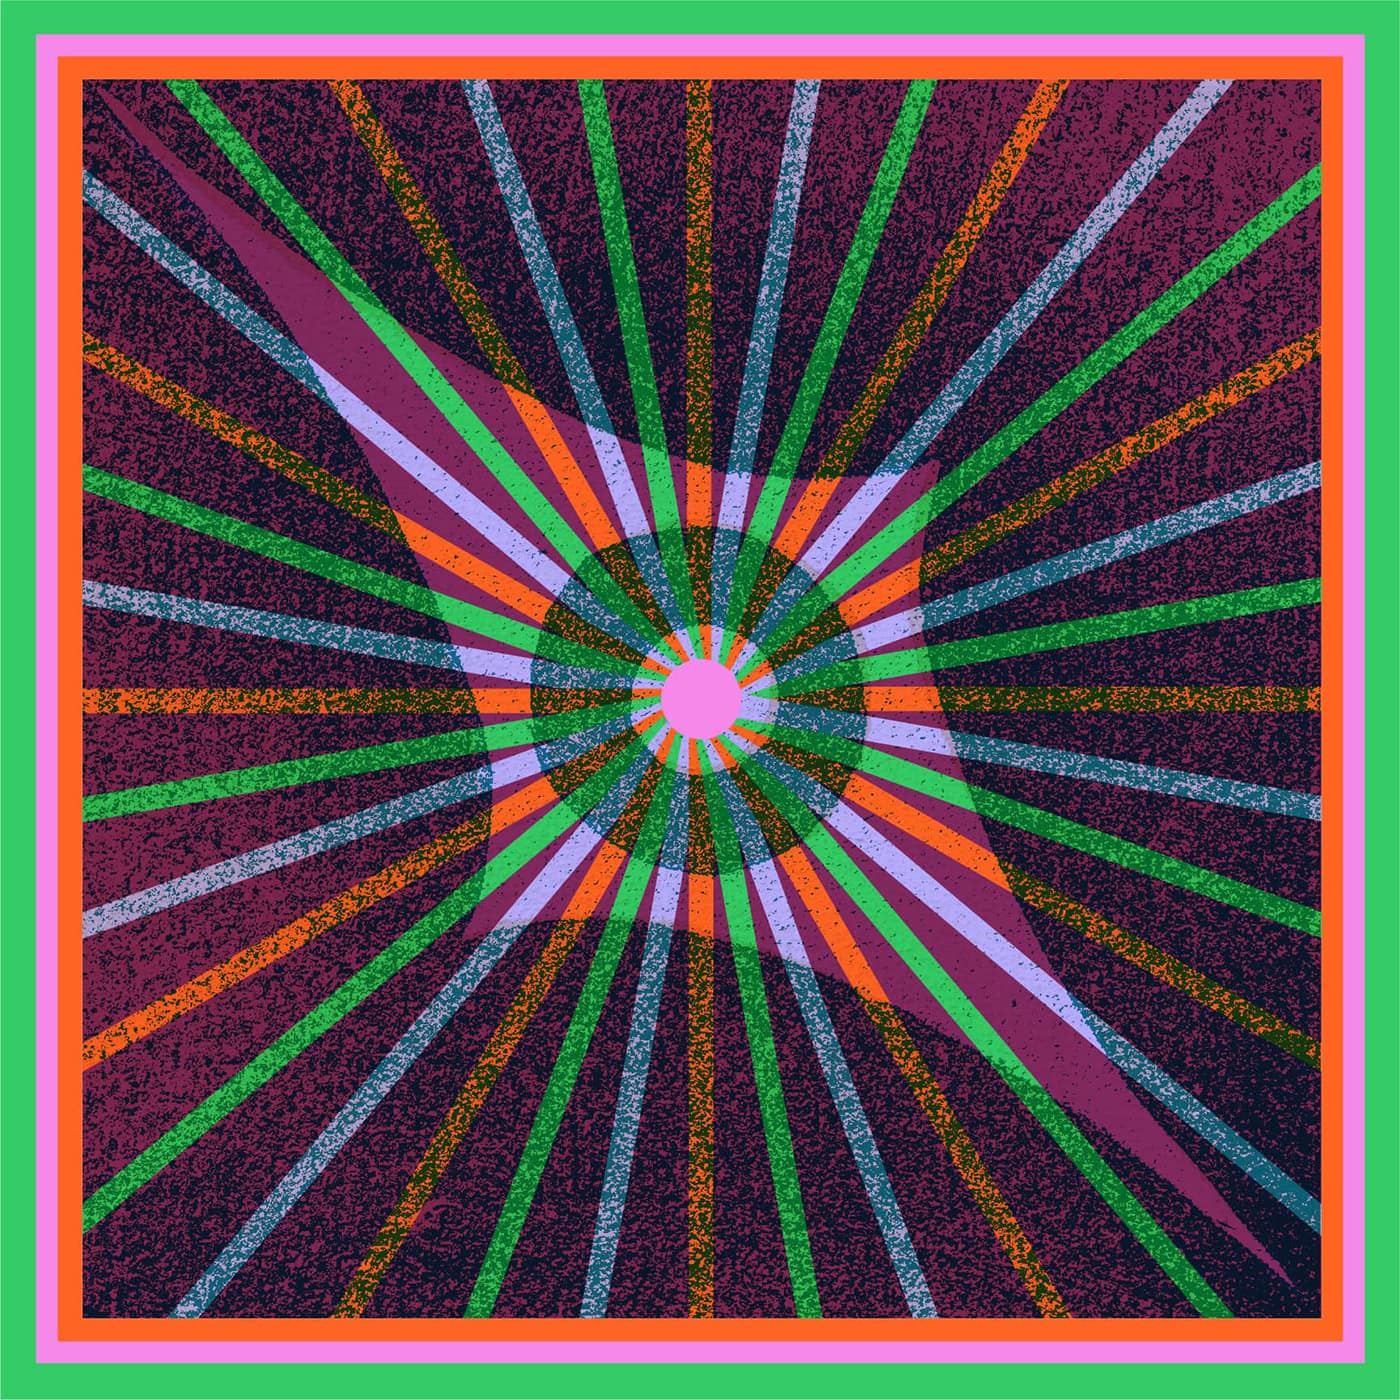 Album cover for the Harlequins featuring a pyschedelic design radiating lines from a circle